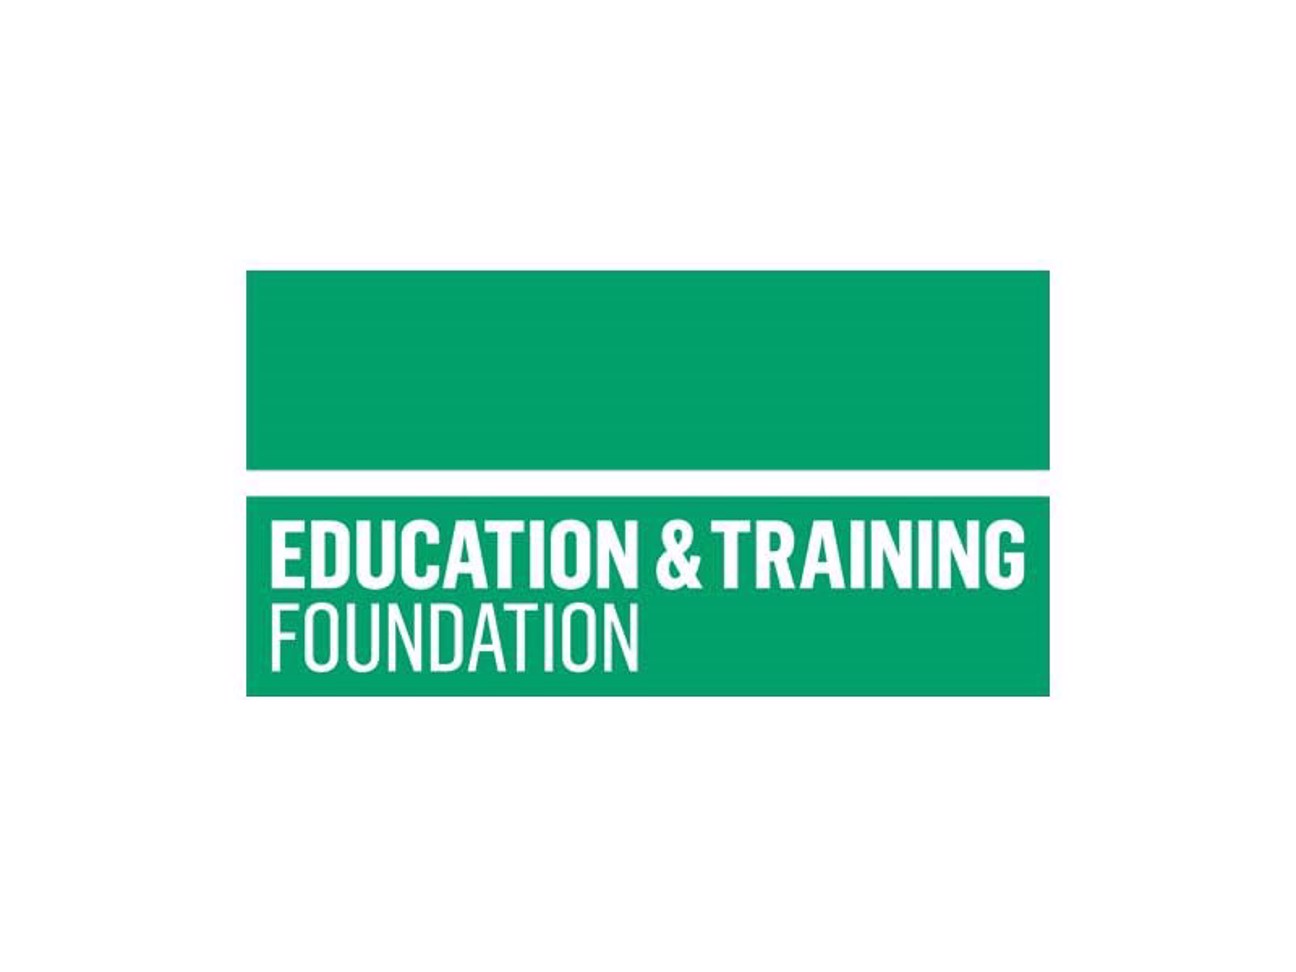 Education and Funding Foundation